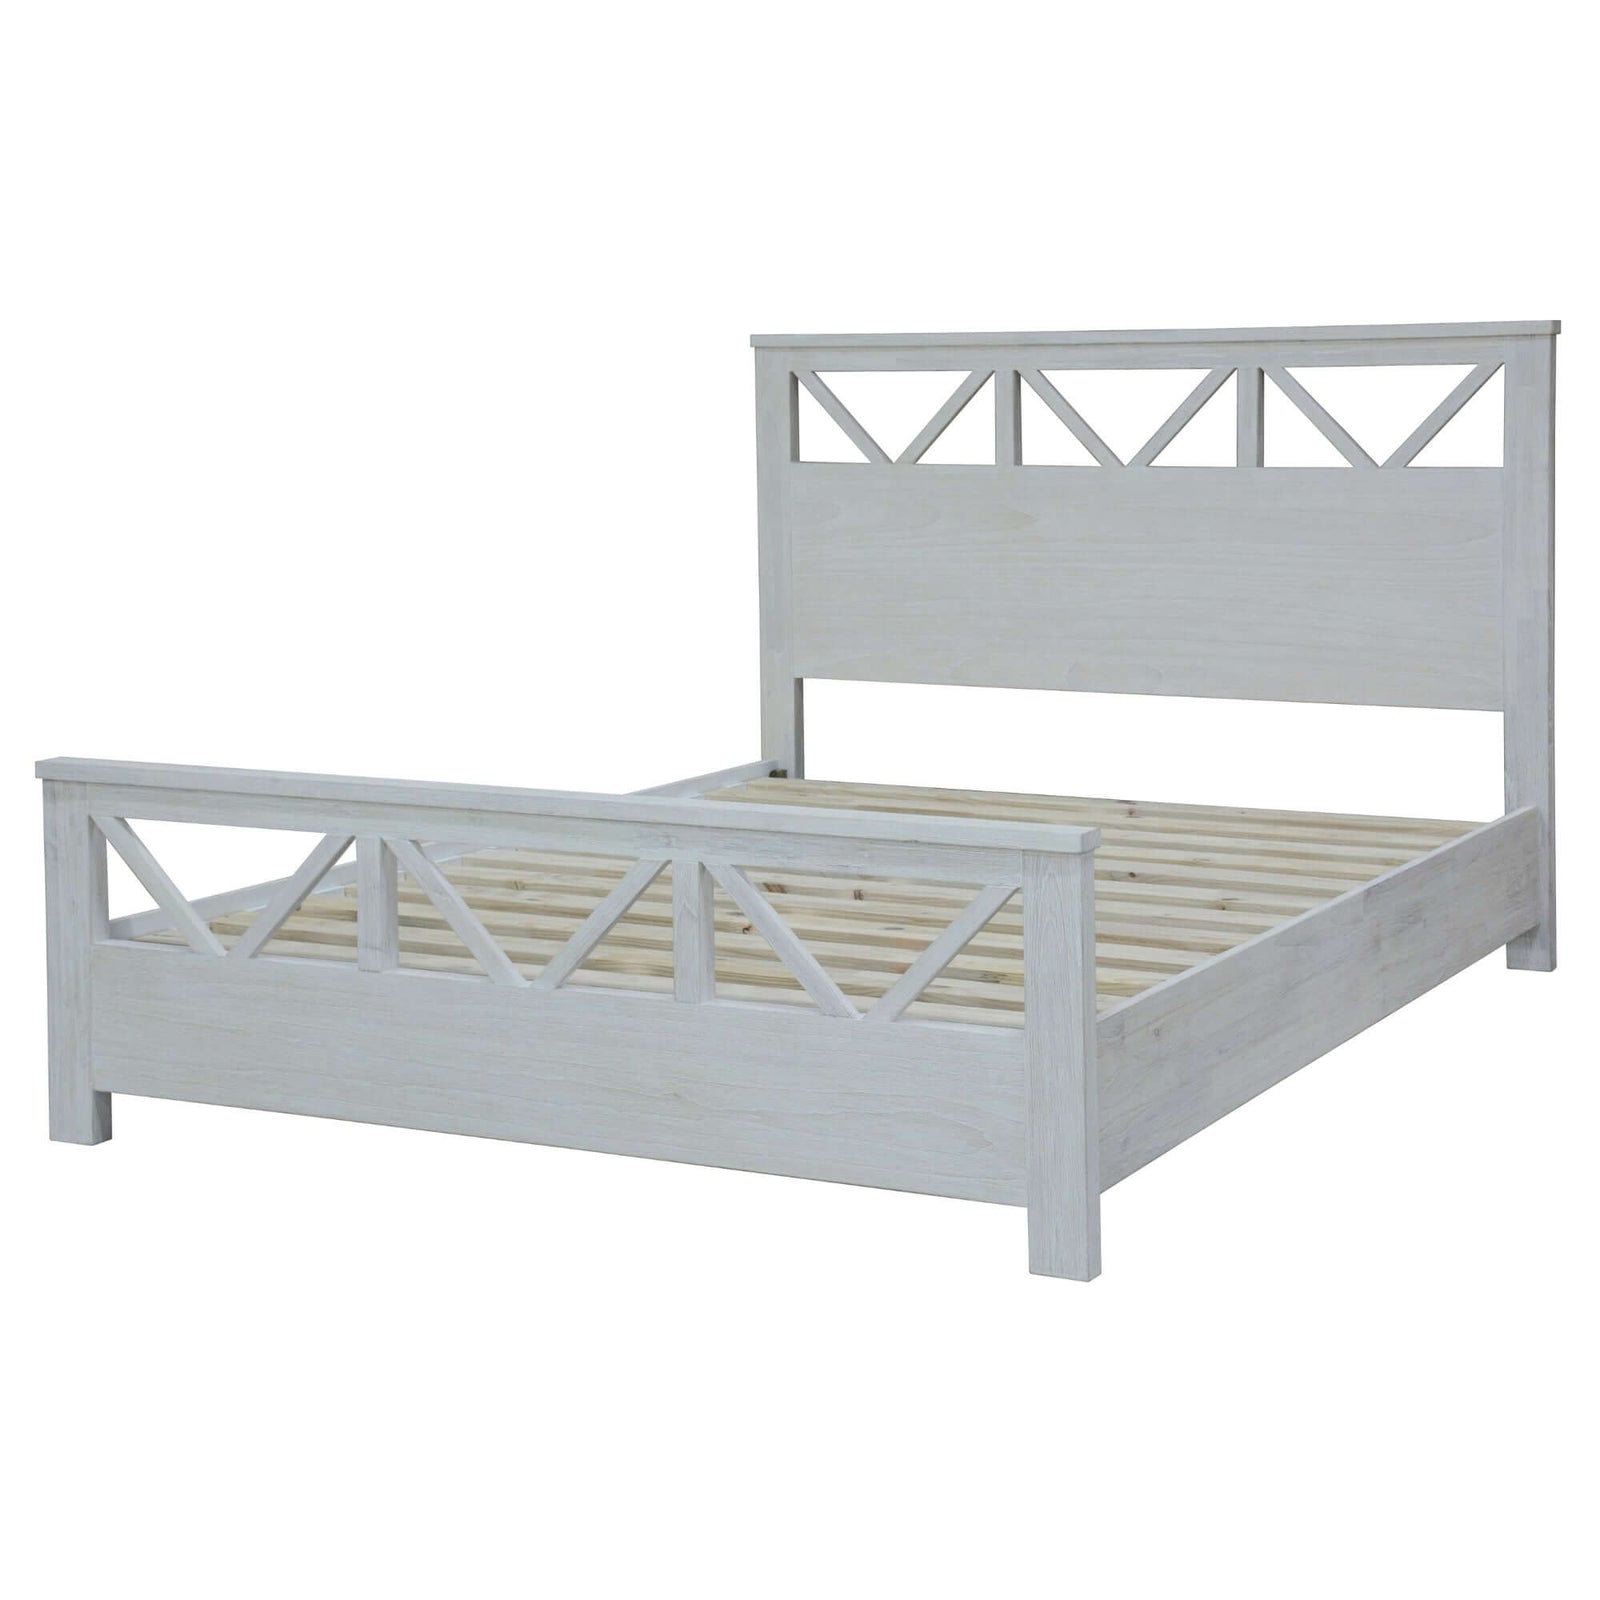 Solid Timber Double Bed Frame - White Wash Finish-Upinteriors